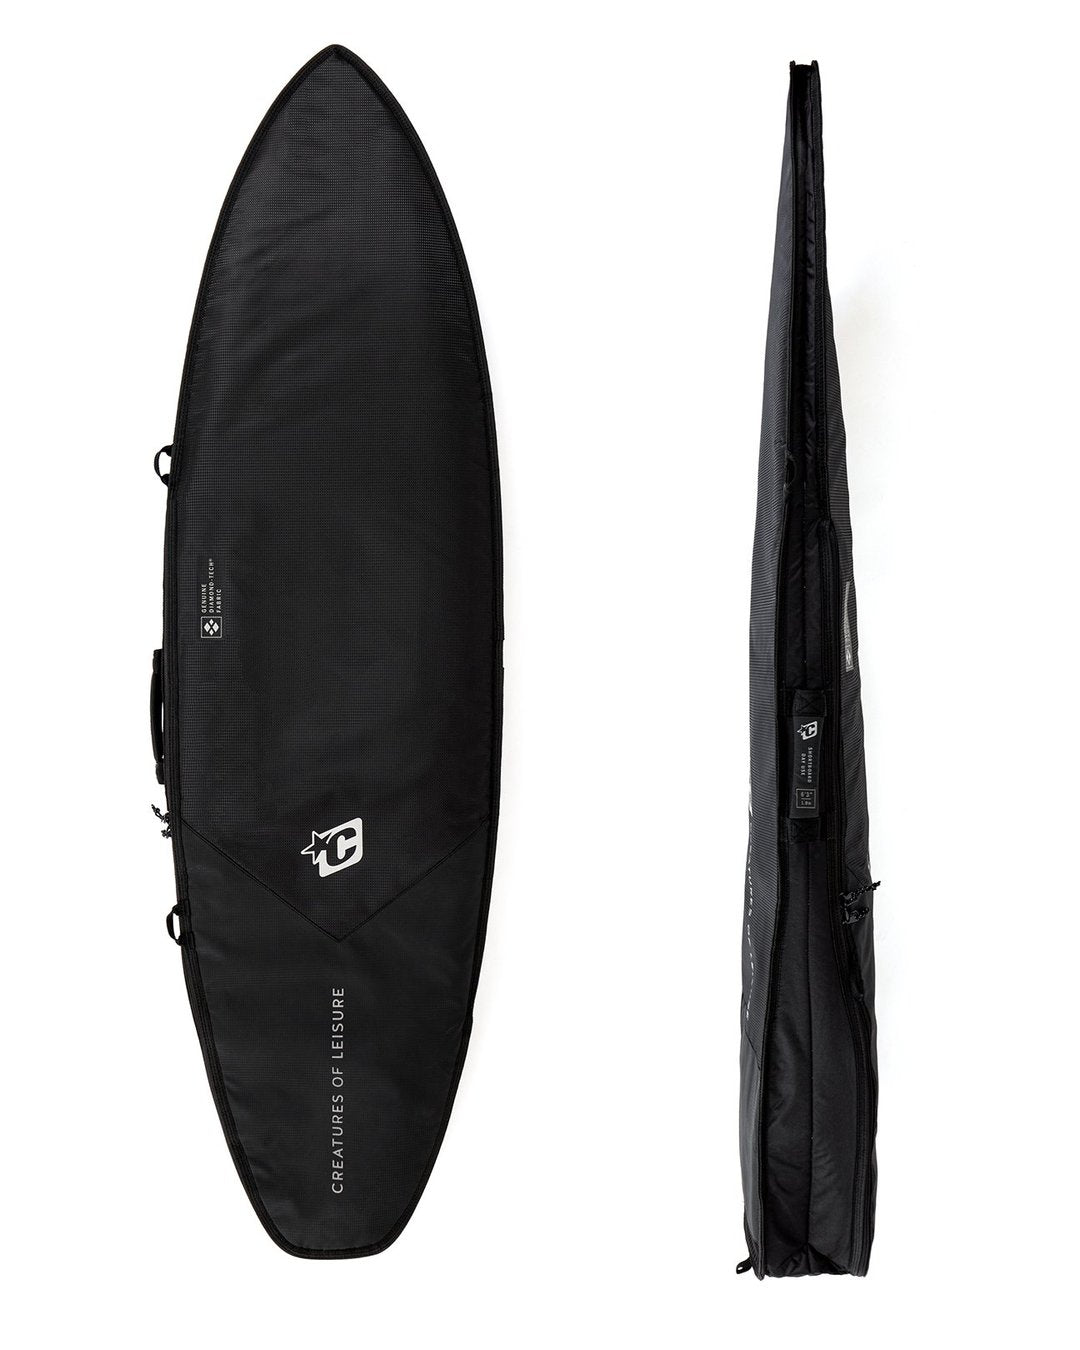 Creatures SHORTBOARD DAY USE DT2.0 7'1" : BLACK SILVER - Board Store CreaturesBoardcover  